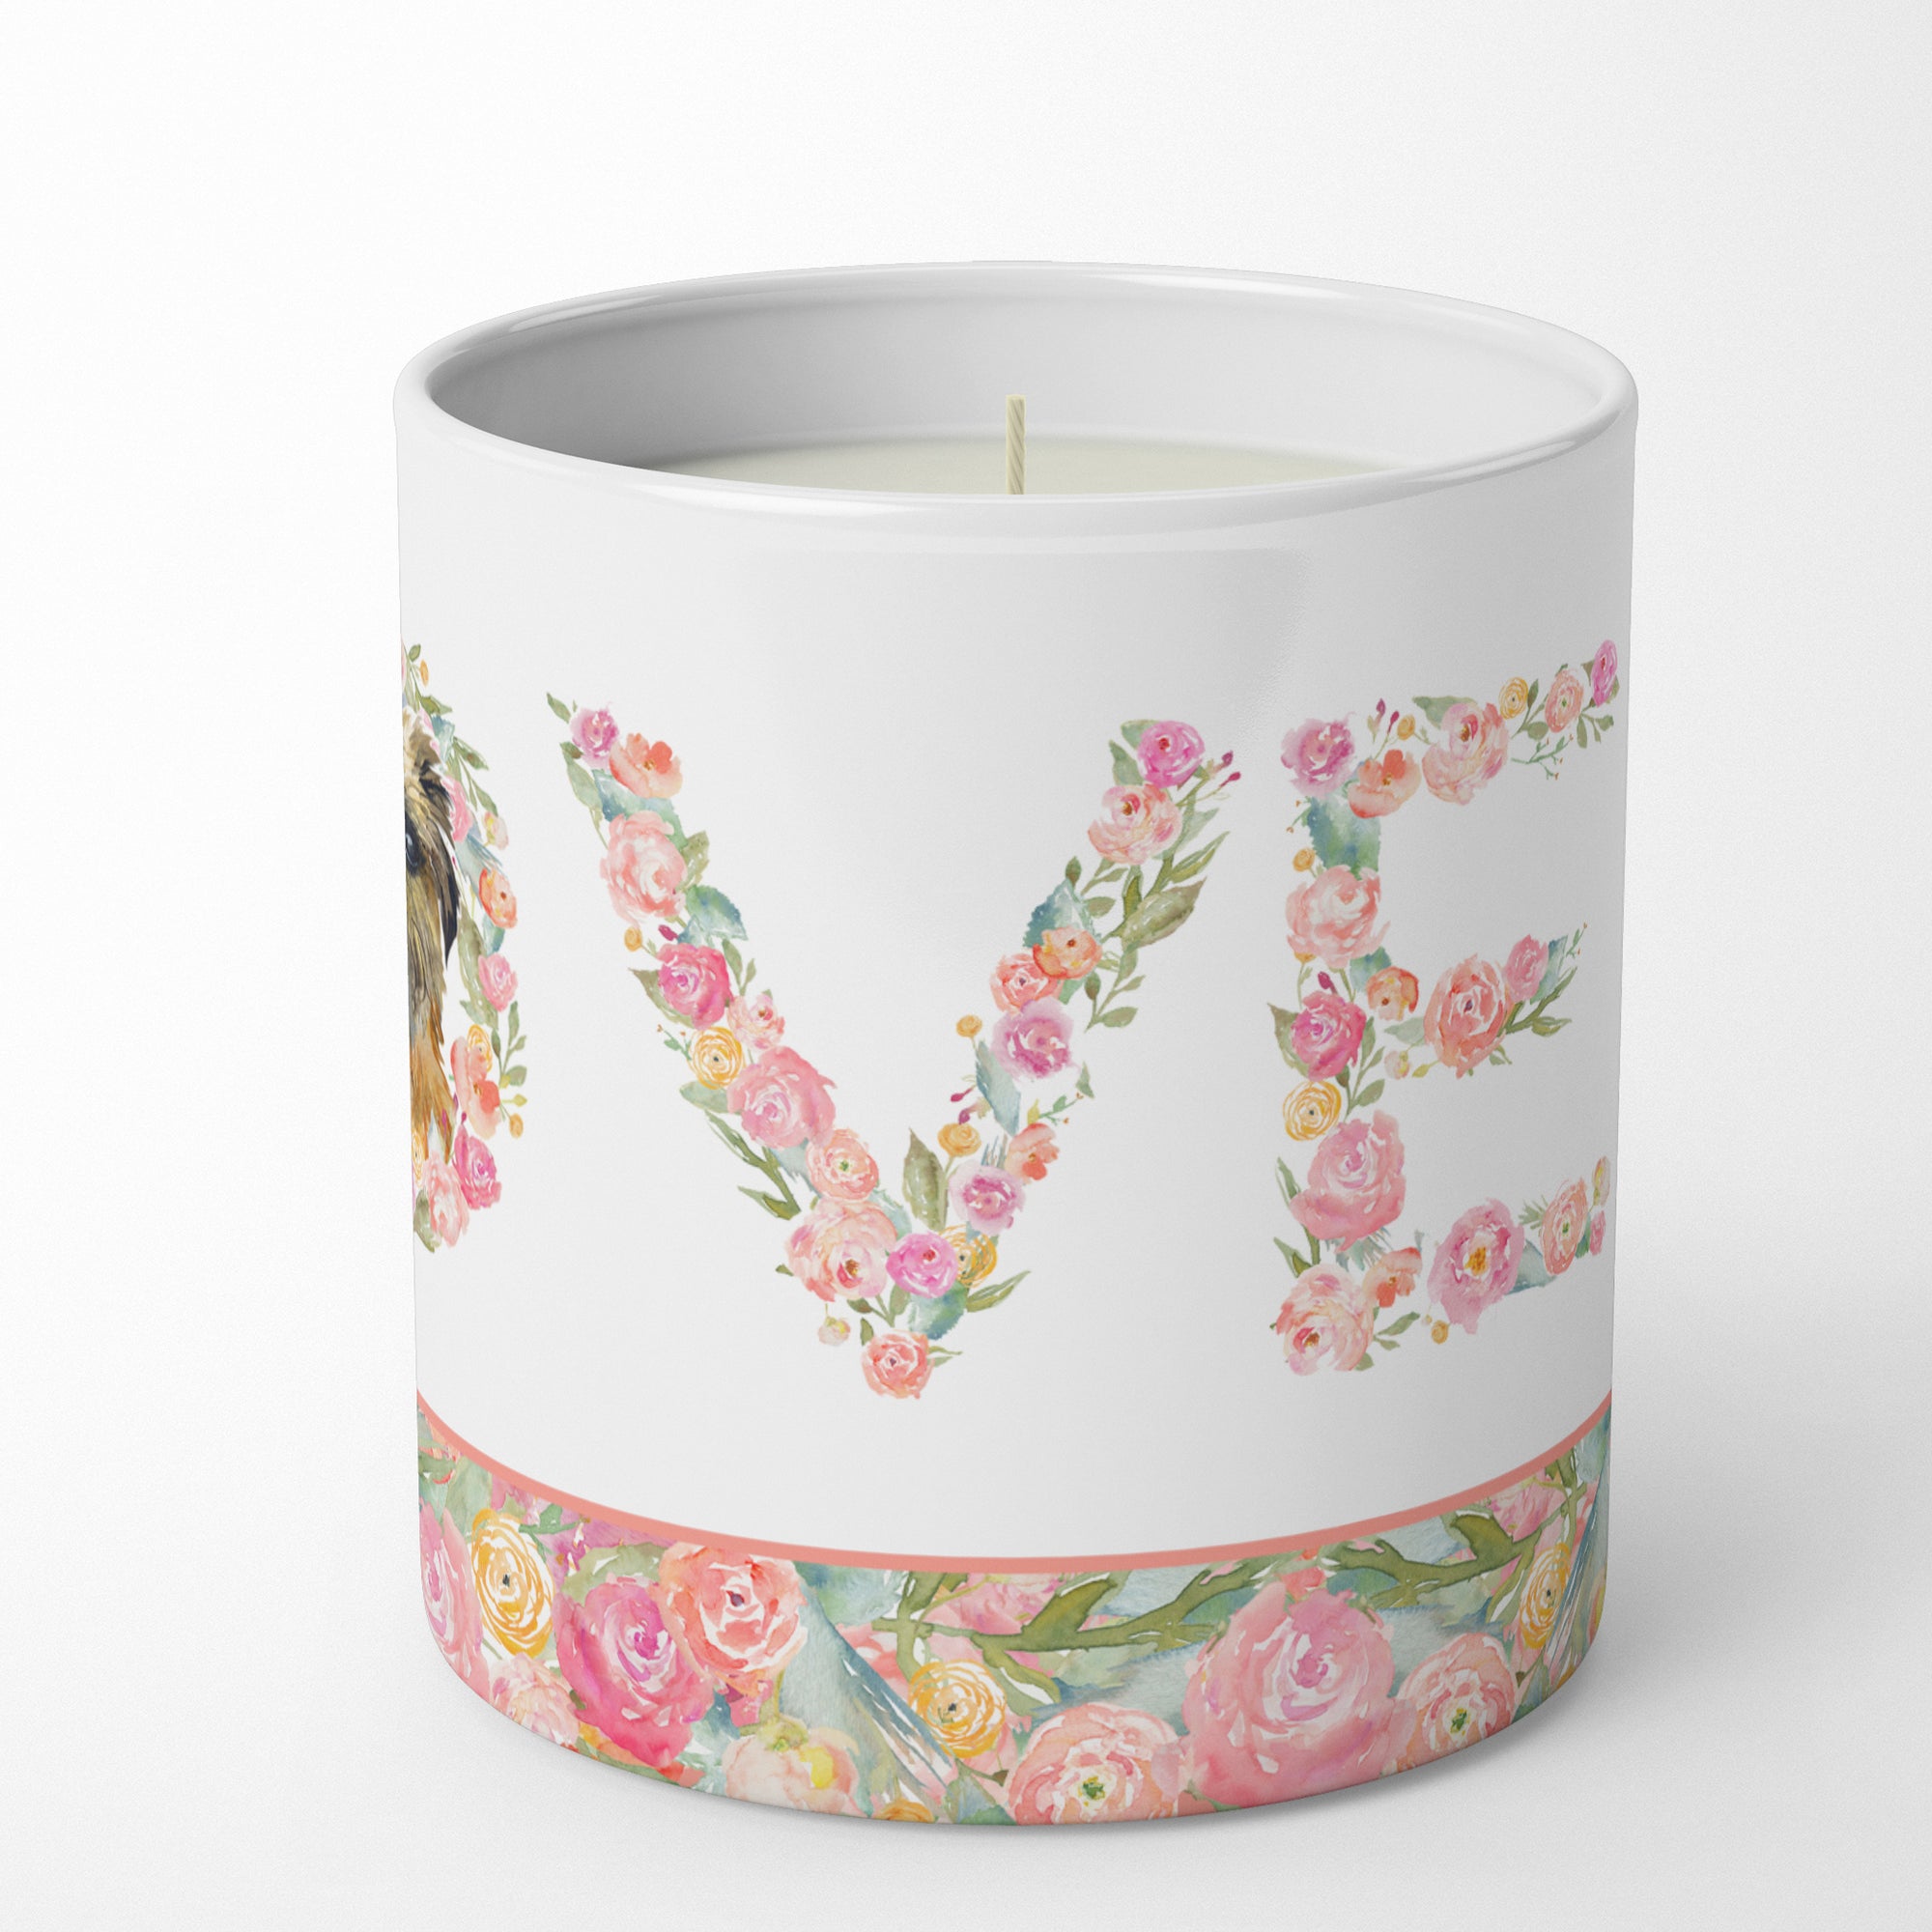 Brussels Griffon Love 10 oz Decorative Soy Candle - the-store.com